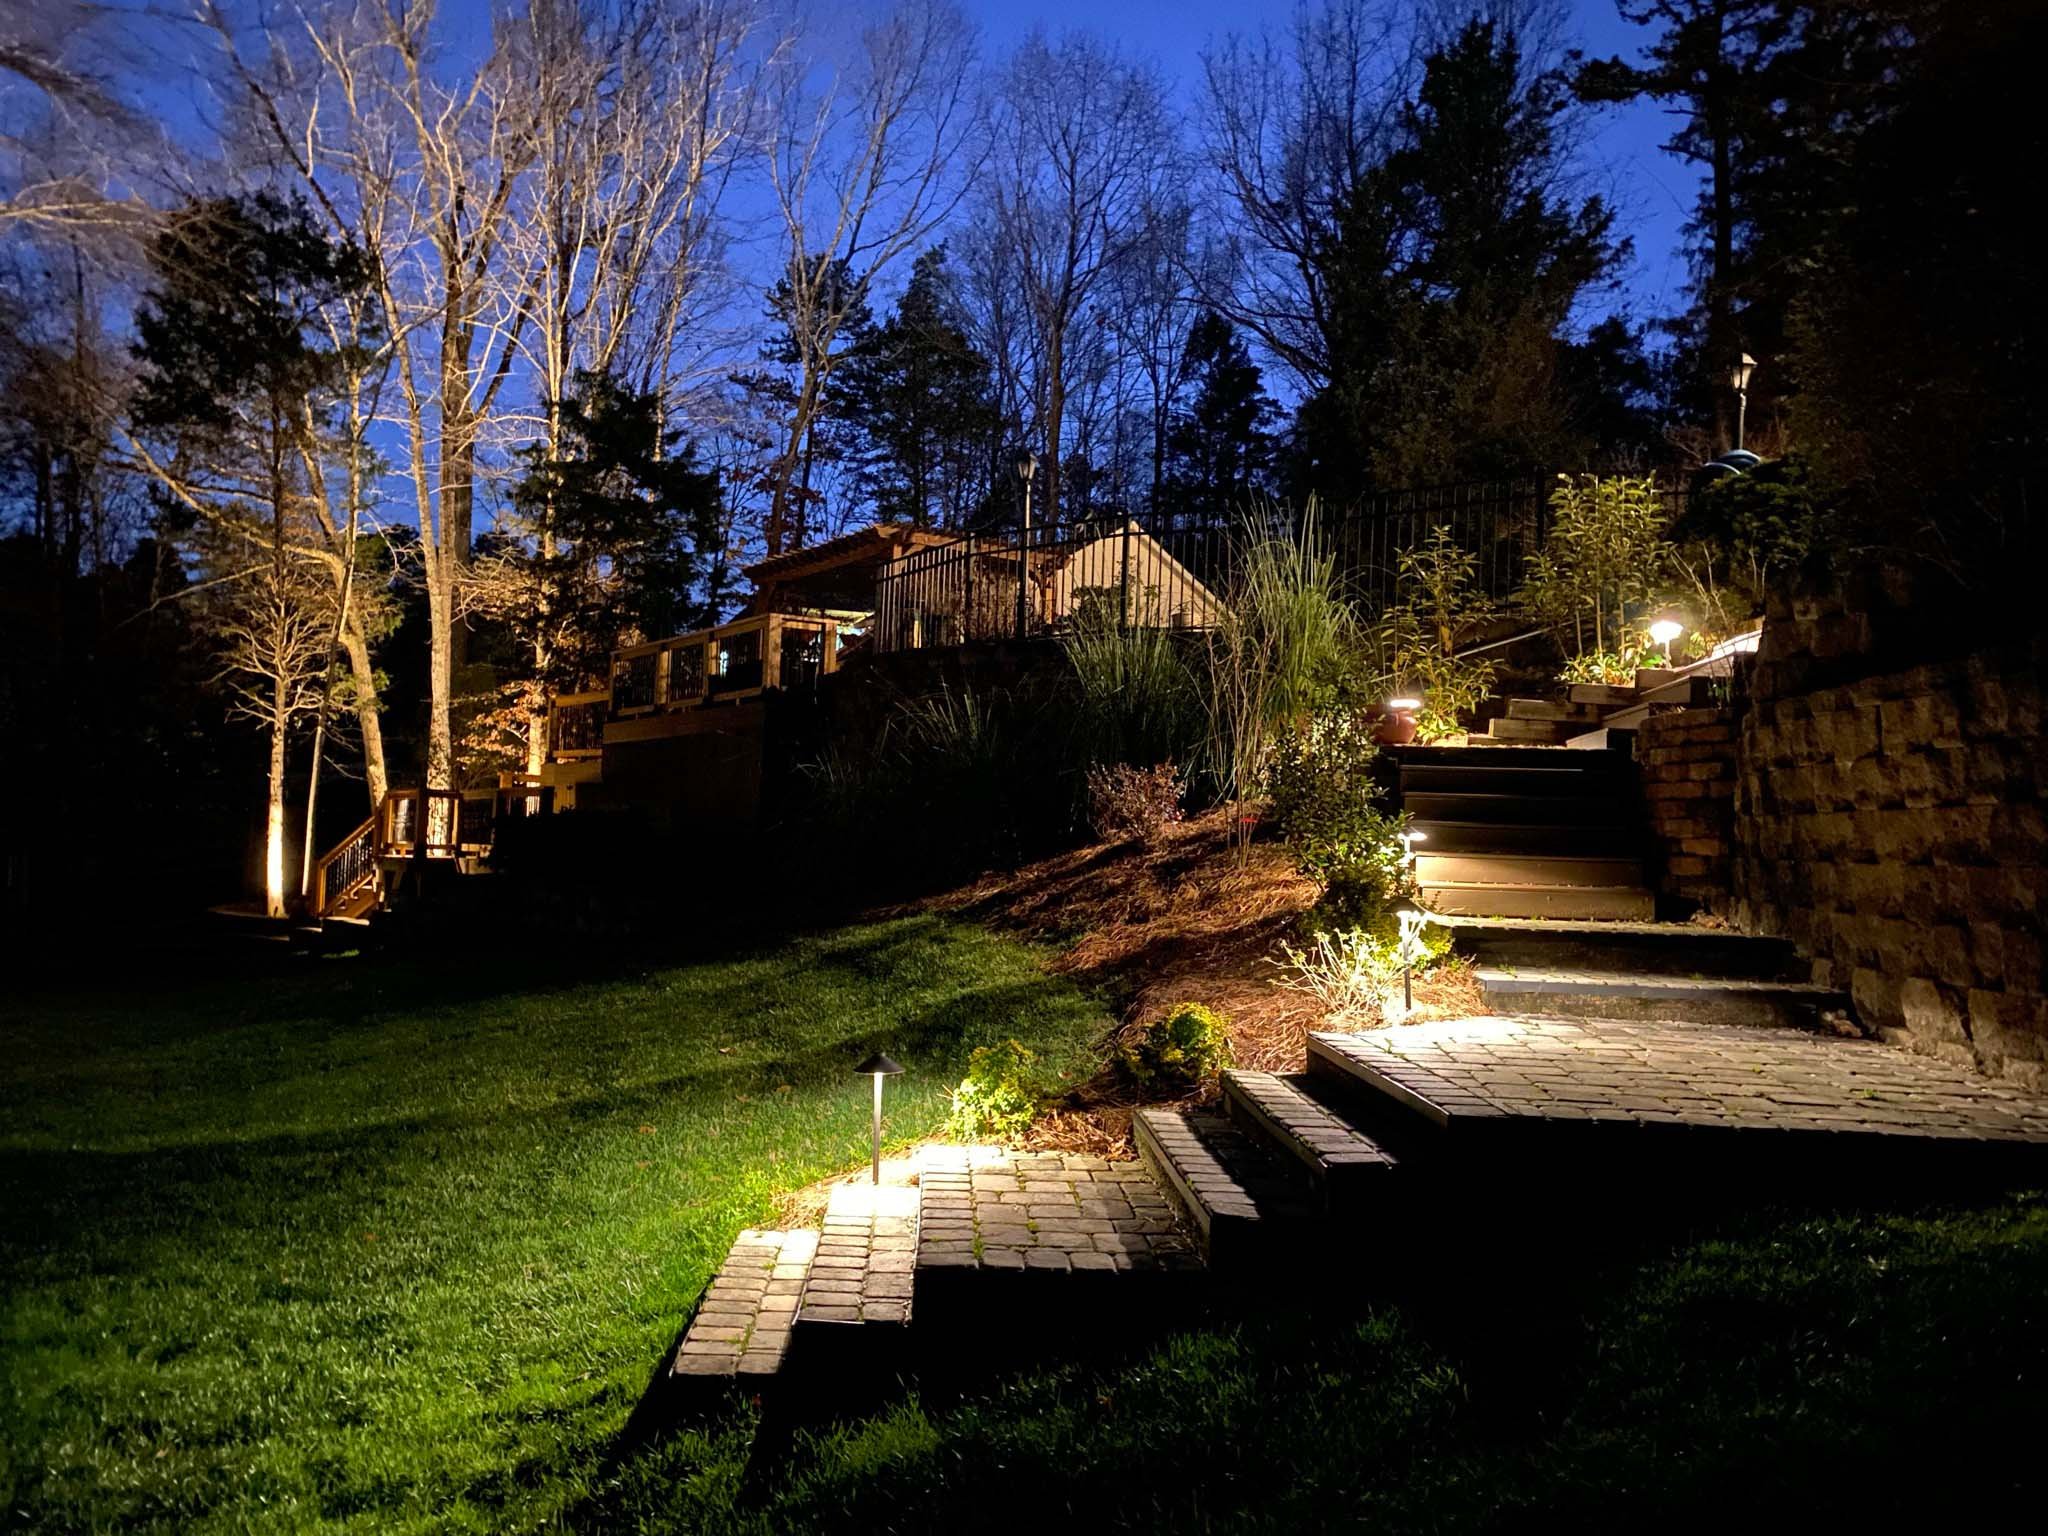  Steps leading from a raised patio down to a grassy yard illuminated with path lights.  